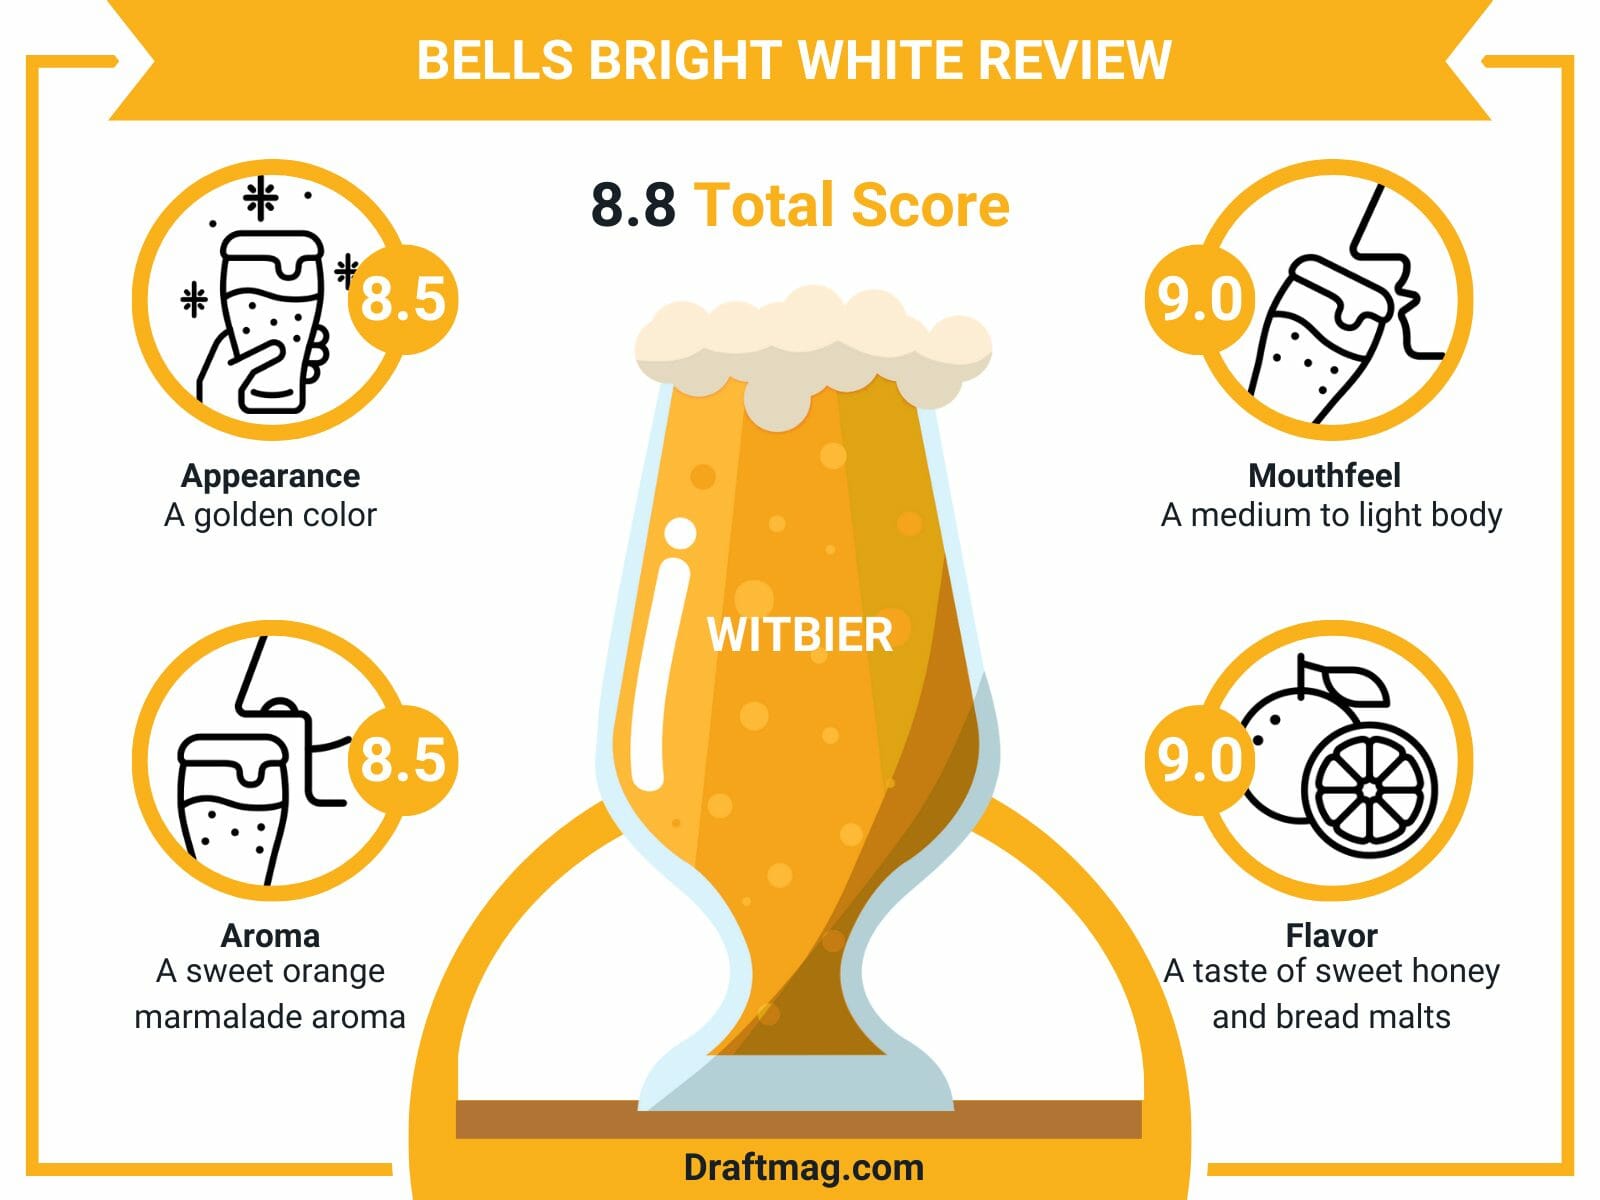 Bells bright white review infographic